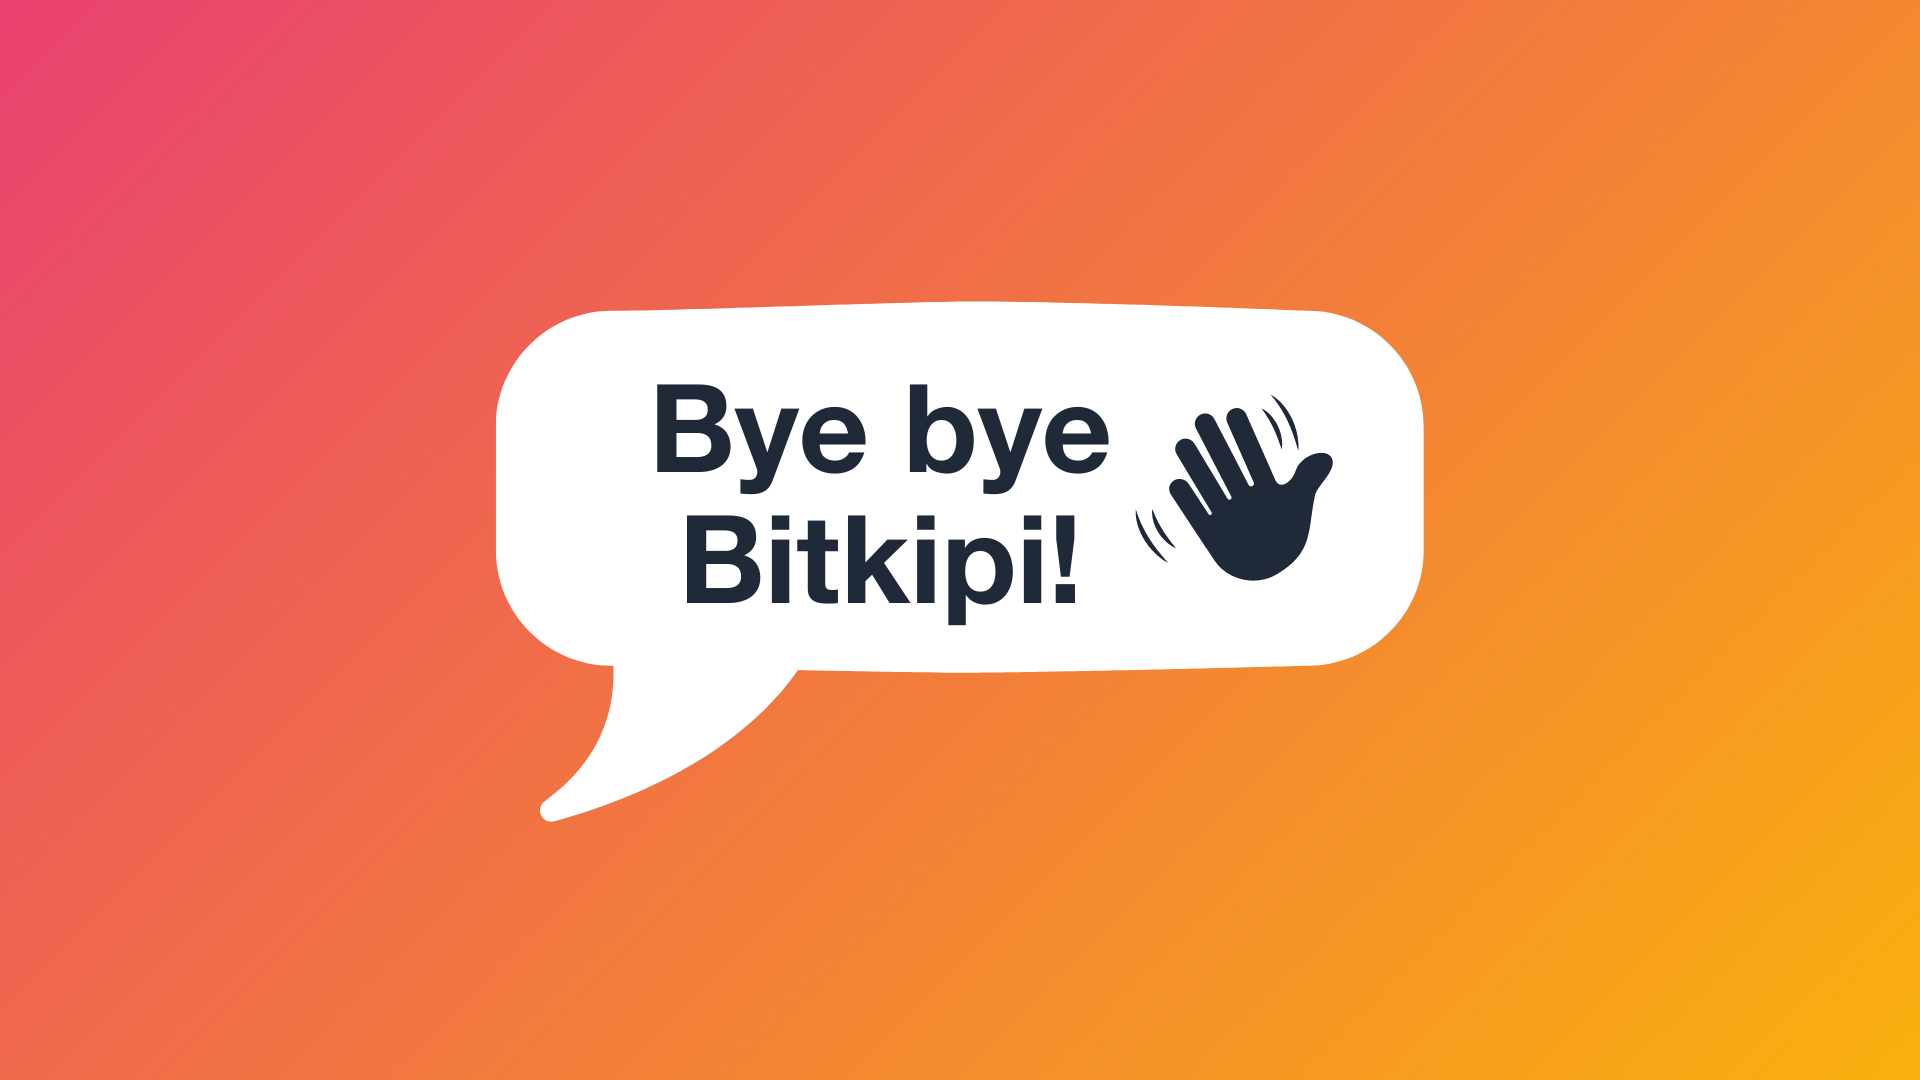 Pocket says farewell to the app and the Bitkipi brand